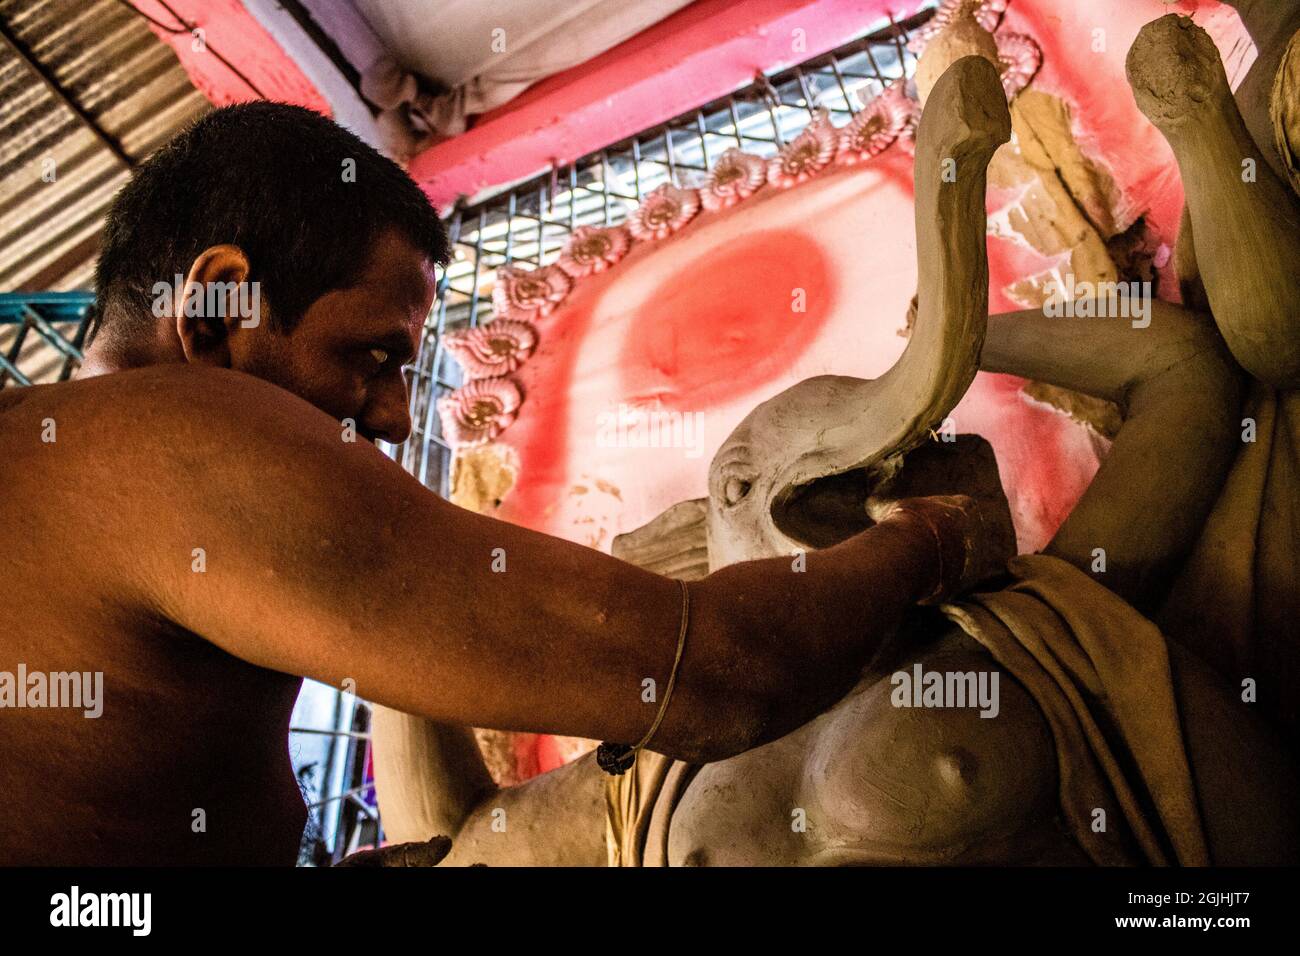 Non Exclusive: BARISHAL, BANGLADESH - SEPTEMBER 9: An artist produces  sculptures of  the Goddess  Durga Puja  at temple as part of preparatives of re Stock Photo